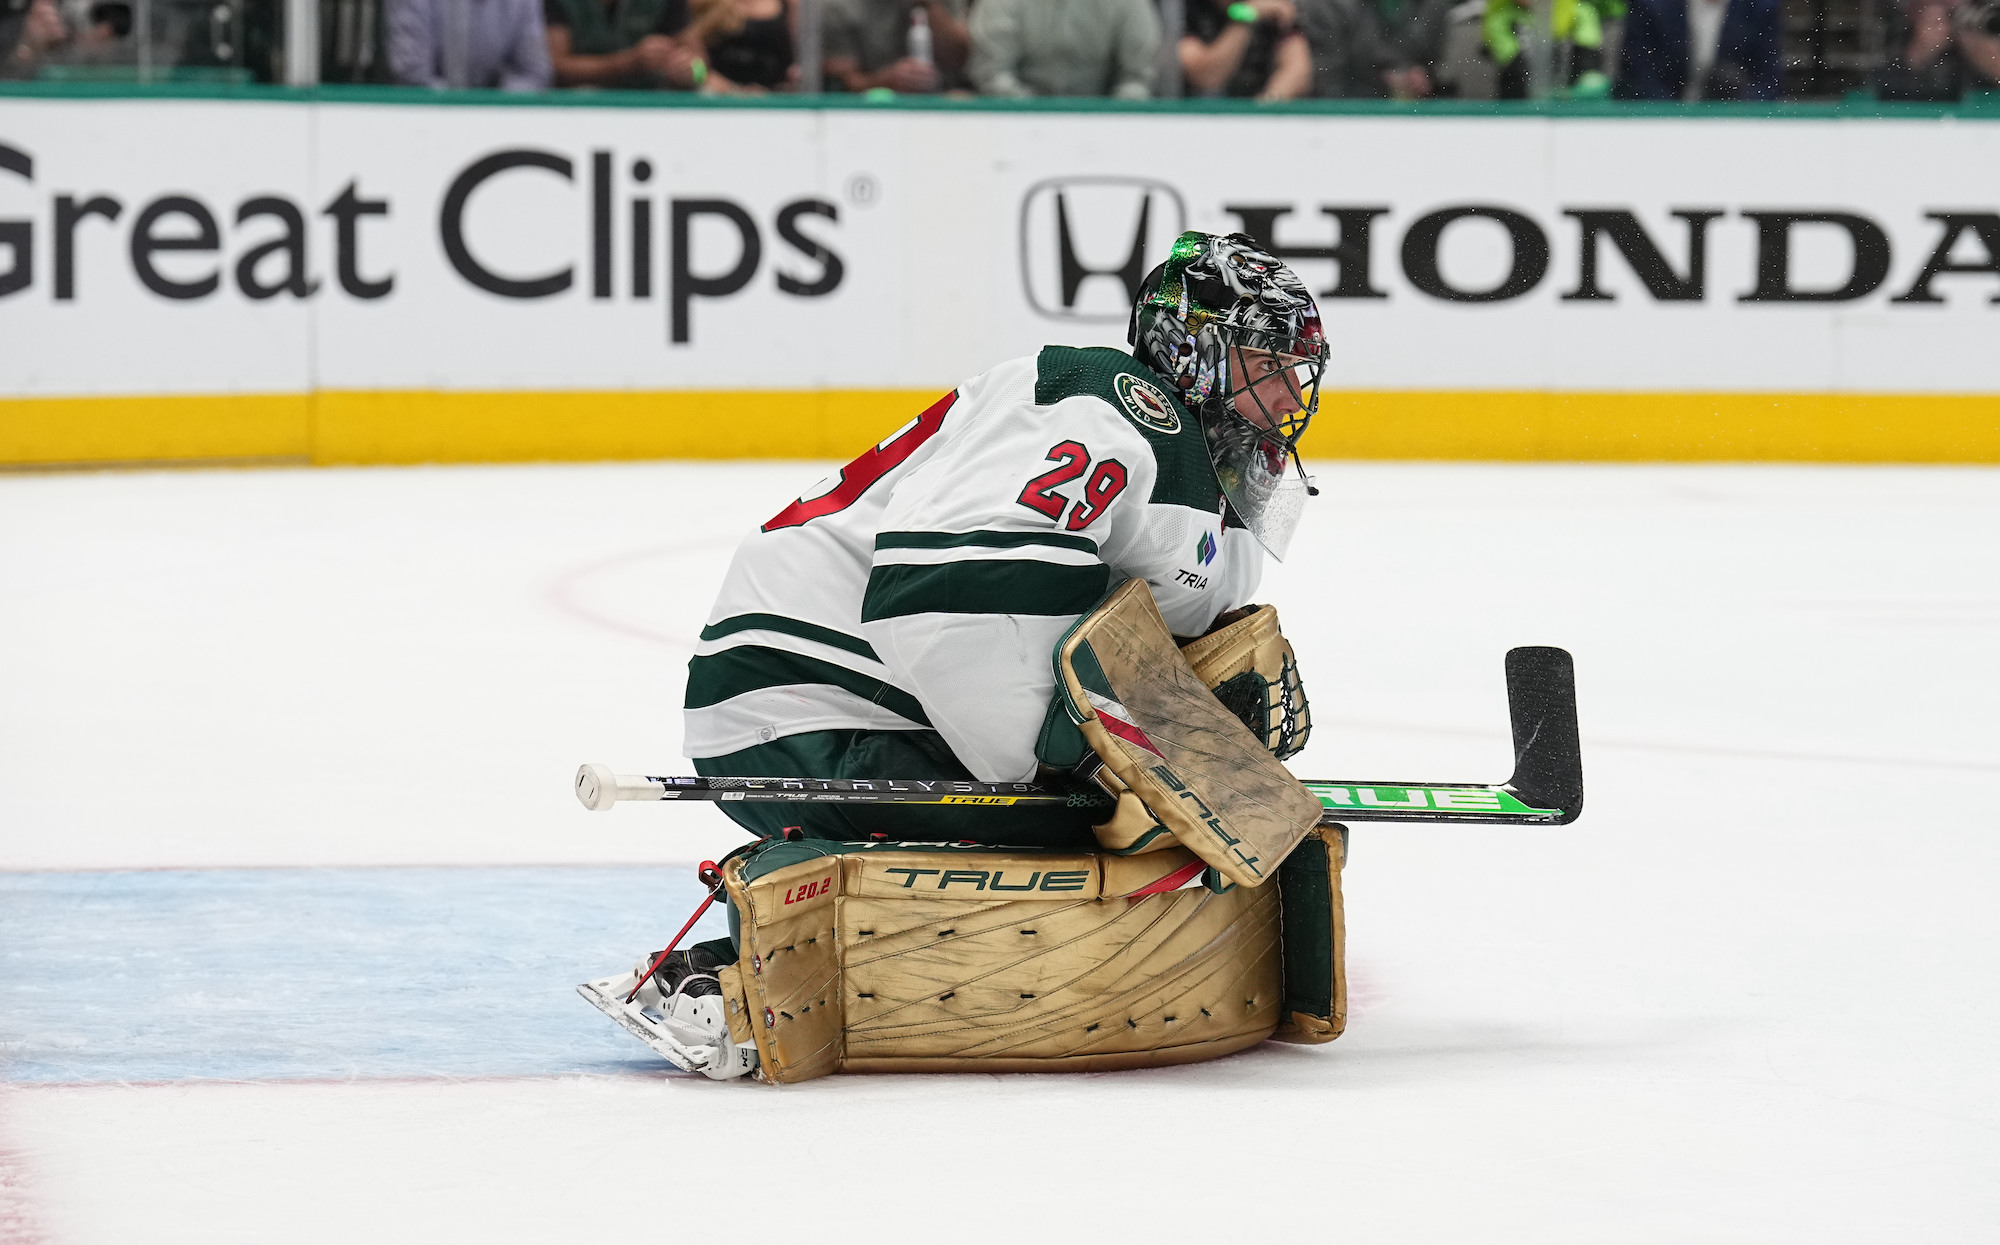 DALLAS, TX APRIL 19: Marc-Andre Fleury #29 of the Minnesota Wild tends goal against the Dallas Stars in Game Two of the First Round of the 2023 Stanley Cup Playoffs at American Airlines Center on April 19, 2023, in Dallas, Texas (Photo by Glenn James/NHLI via Getty Images)